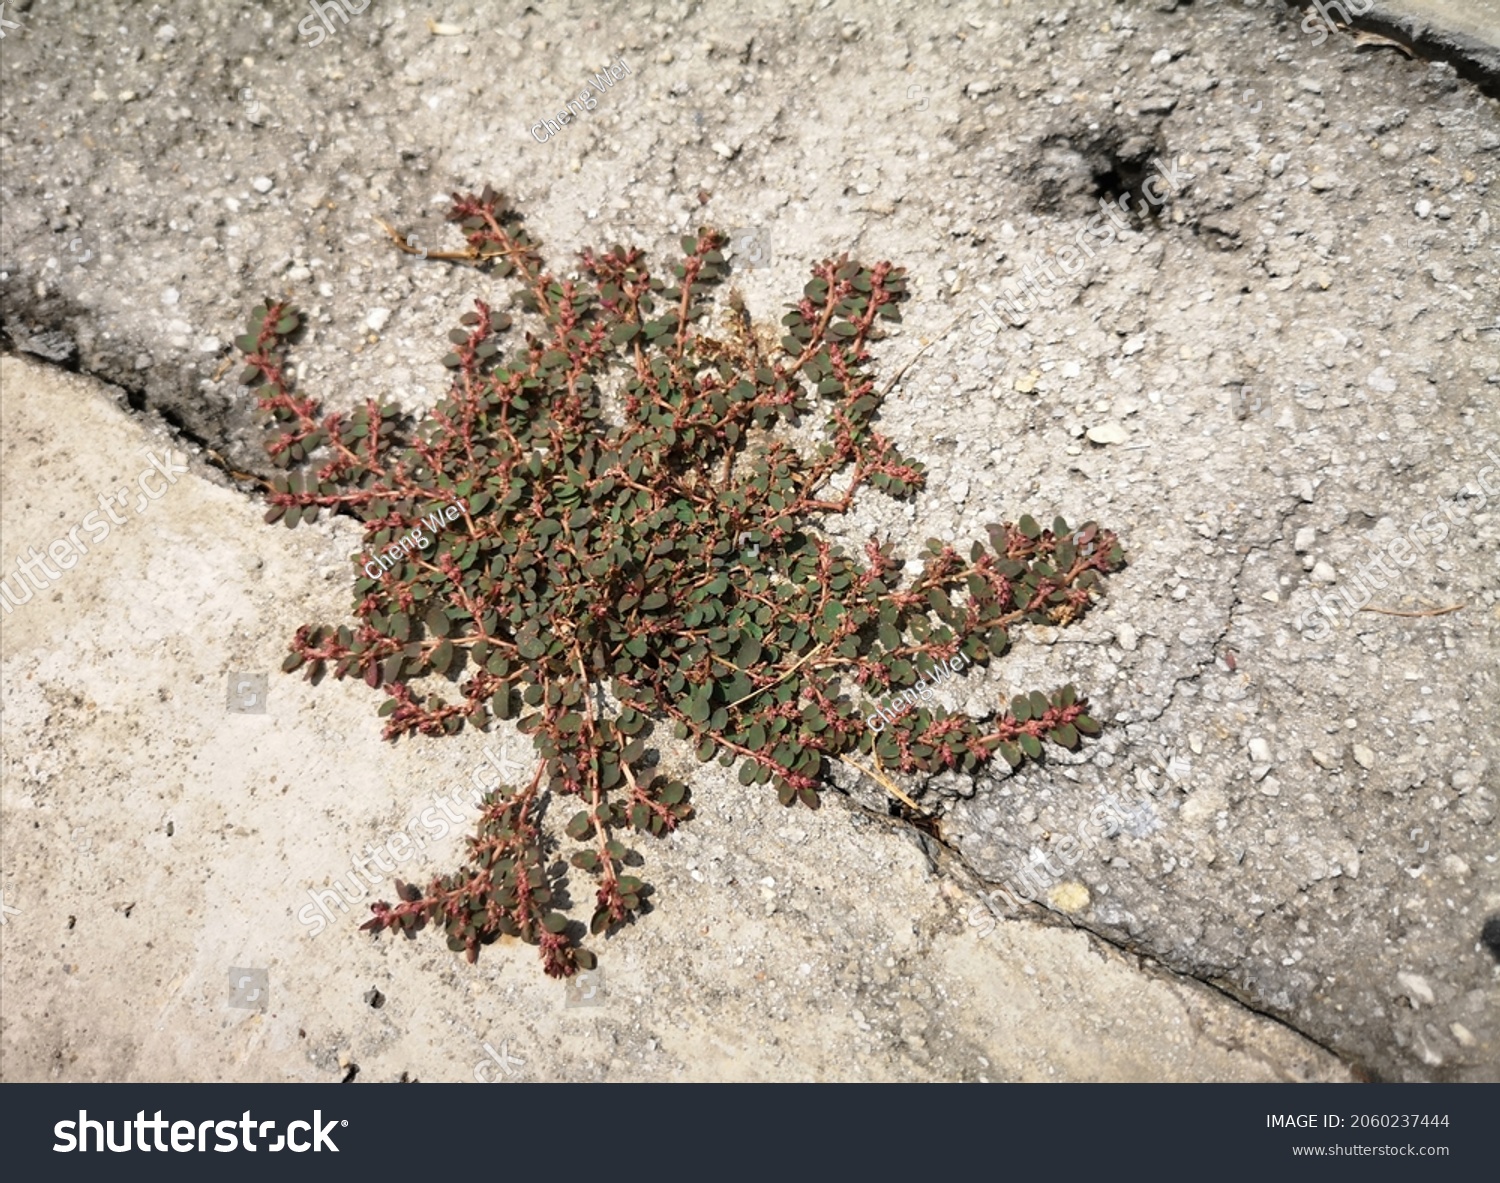 Spotted spurge (Chamaesyce maculata) grows in the cracks of outdoor cement flooring. A dark green plant with red stems that grows low to the ground in a mat-like fashion. #2060237444